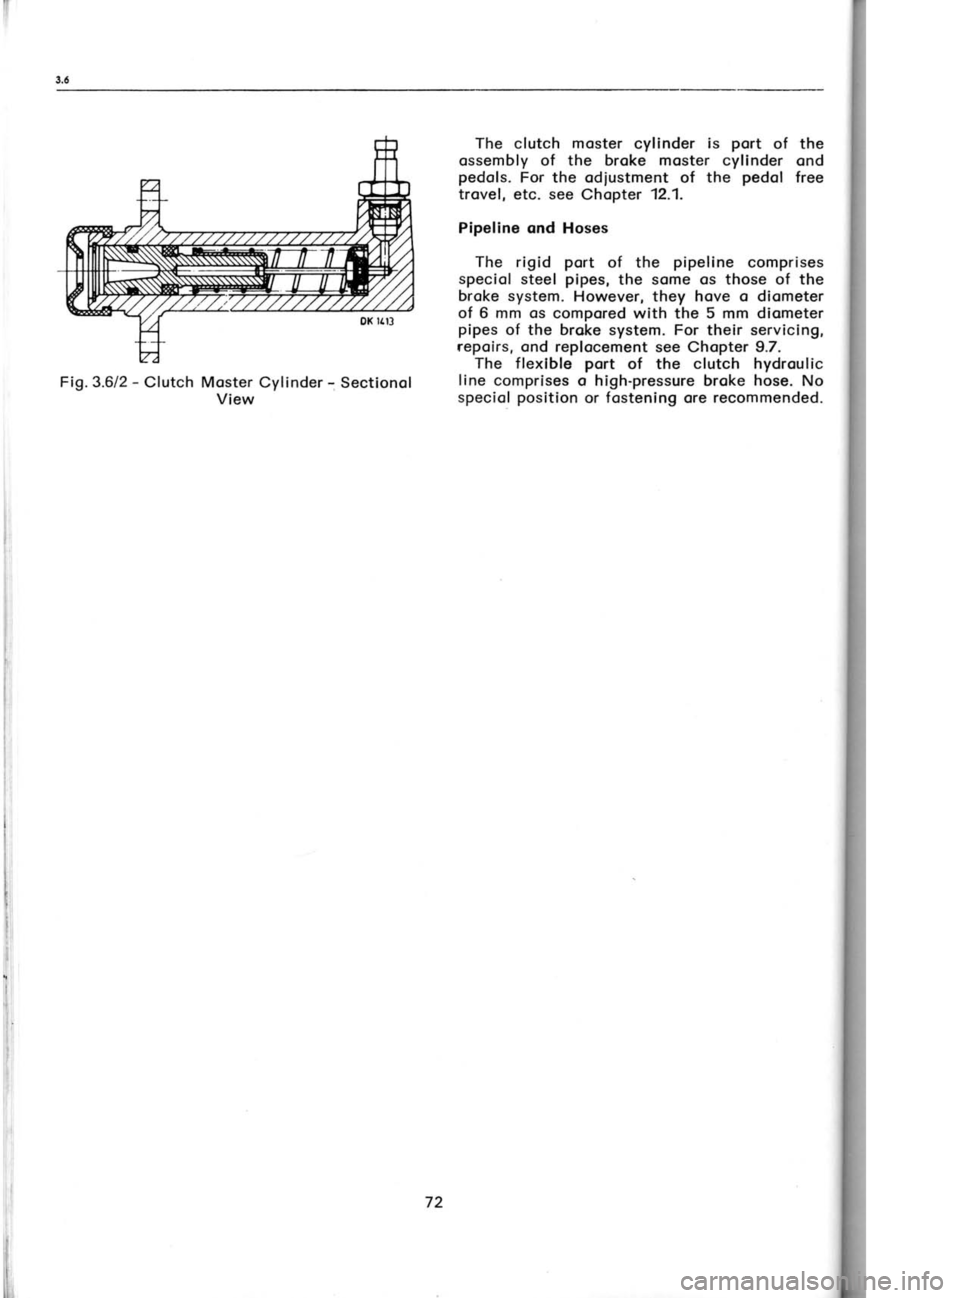 SKODA 120 LS 1980  Workshop Manual The 
clutch  moster 
cylinder  is port 
of  the
ossembly of  the  broke  moster cylinder  ond
pedols.  For the  odiustment  of  the  pedol 
free
trovel, etc. see  Chopter 12.1.
Pipeline  ond Hoses
The